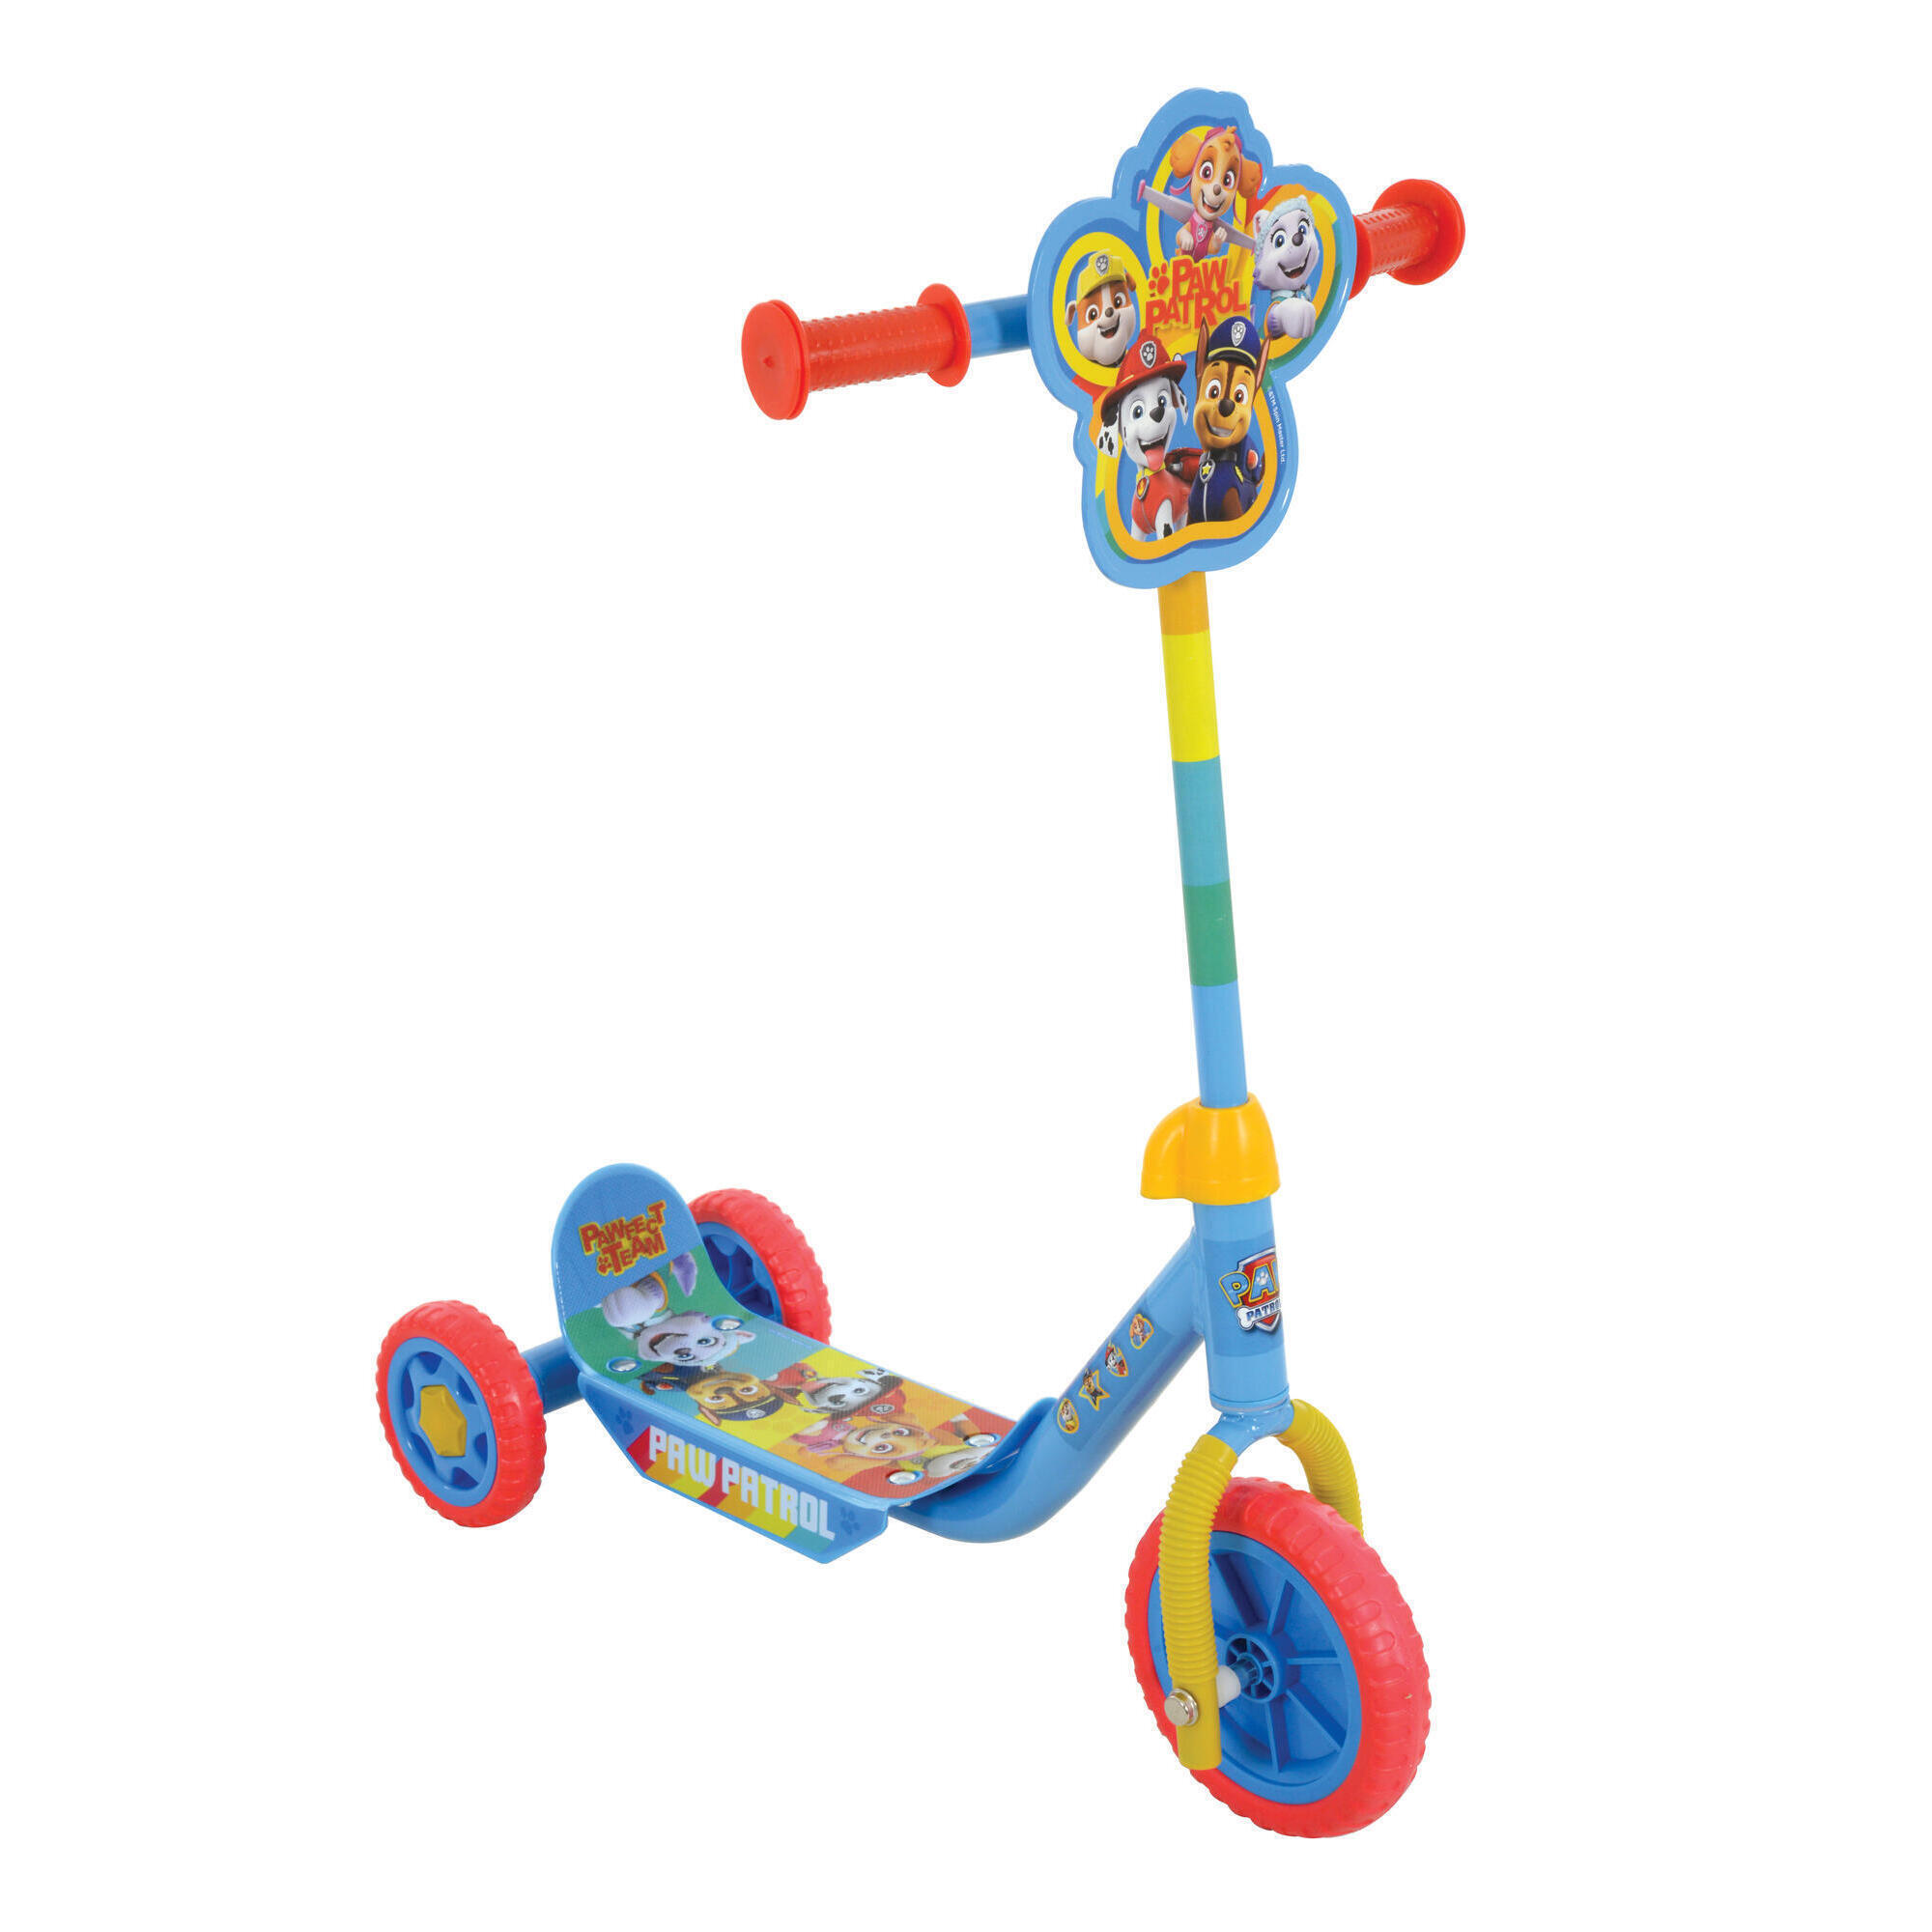 Paw Patrol Deluxe Tri-Scooter 1/7